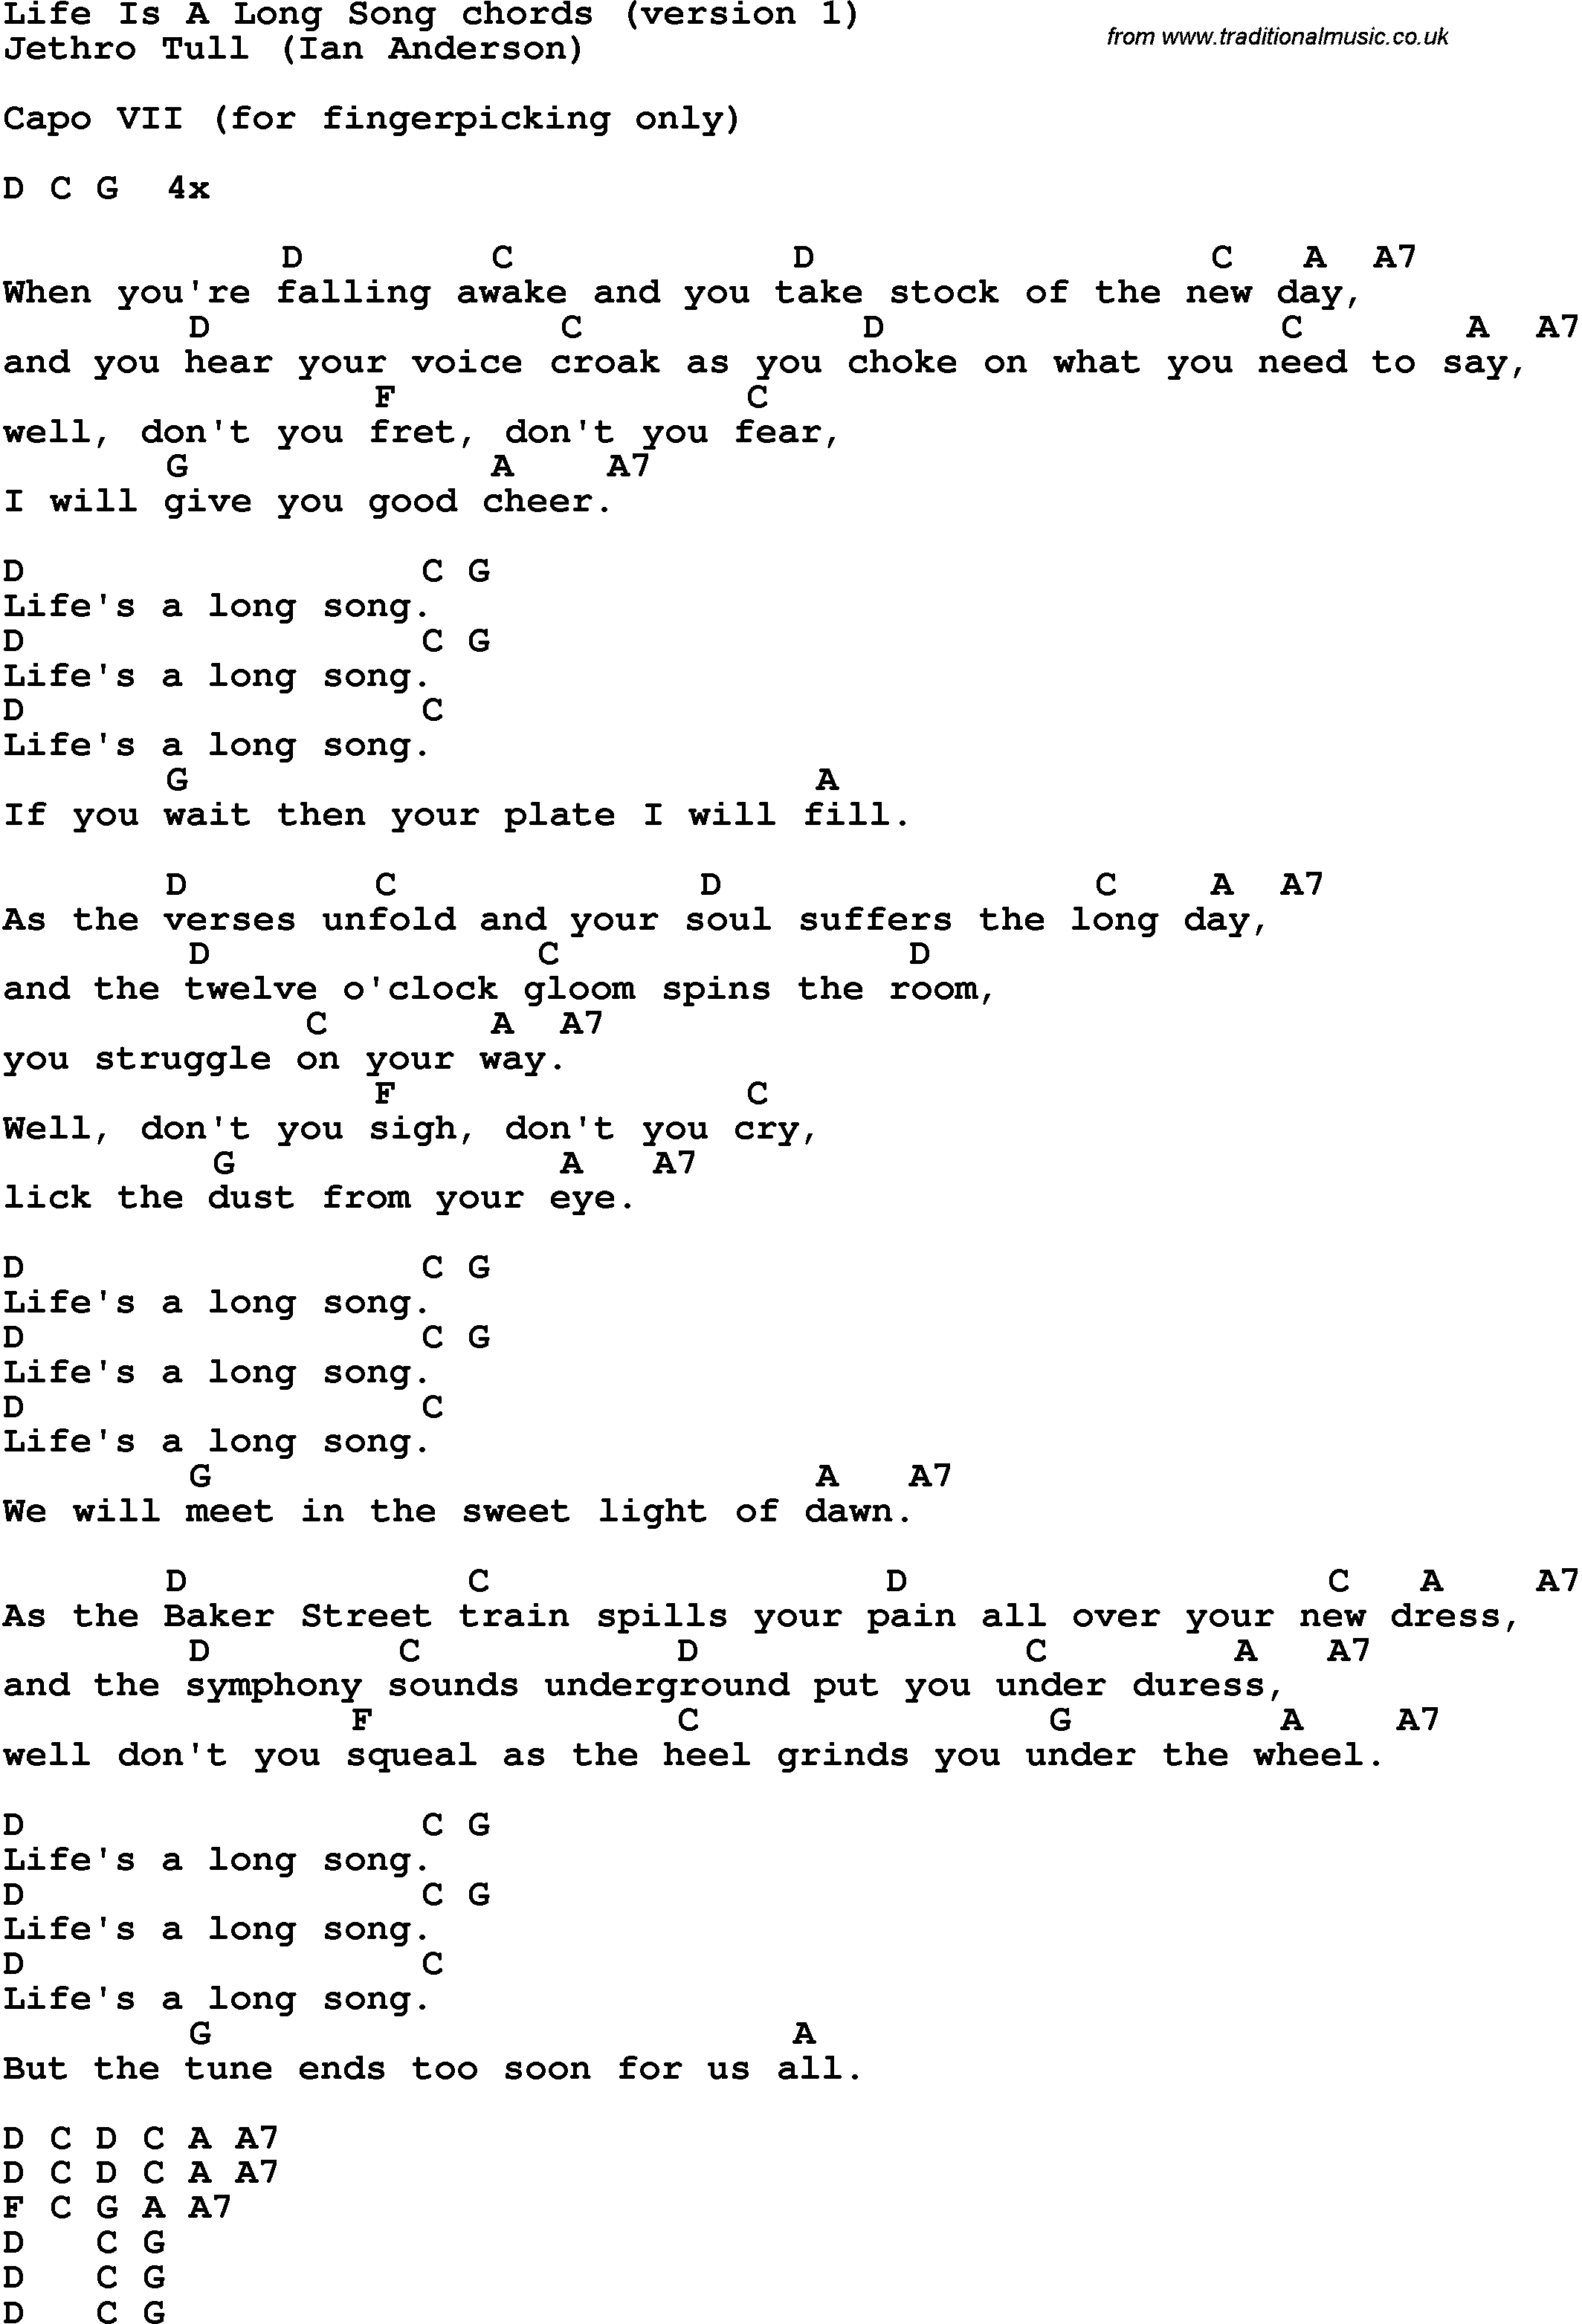 Song Lyrics with guitar chords for Life Is A Long Song